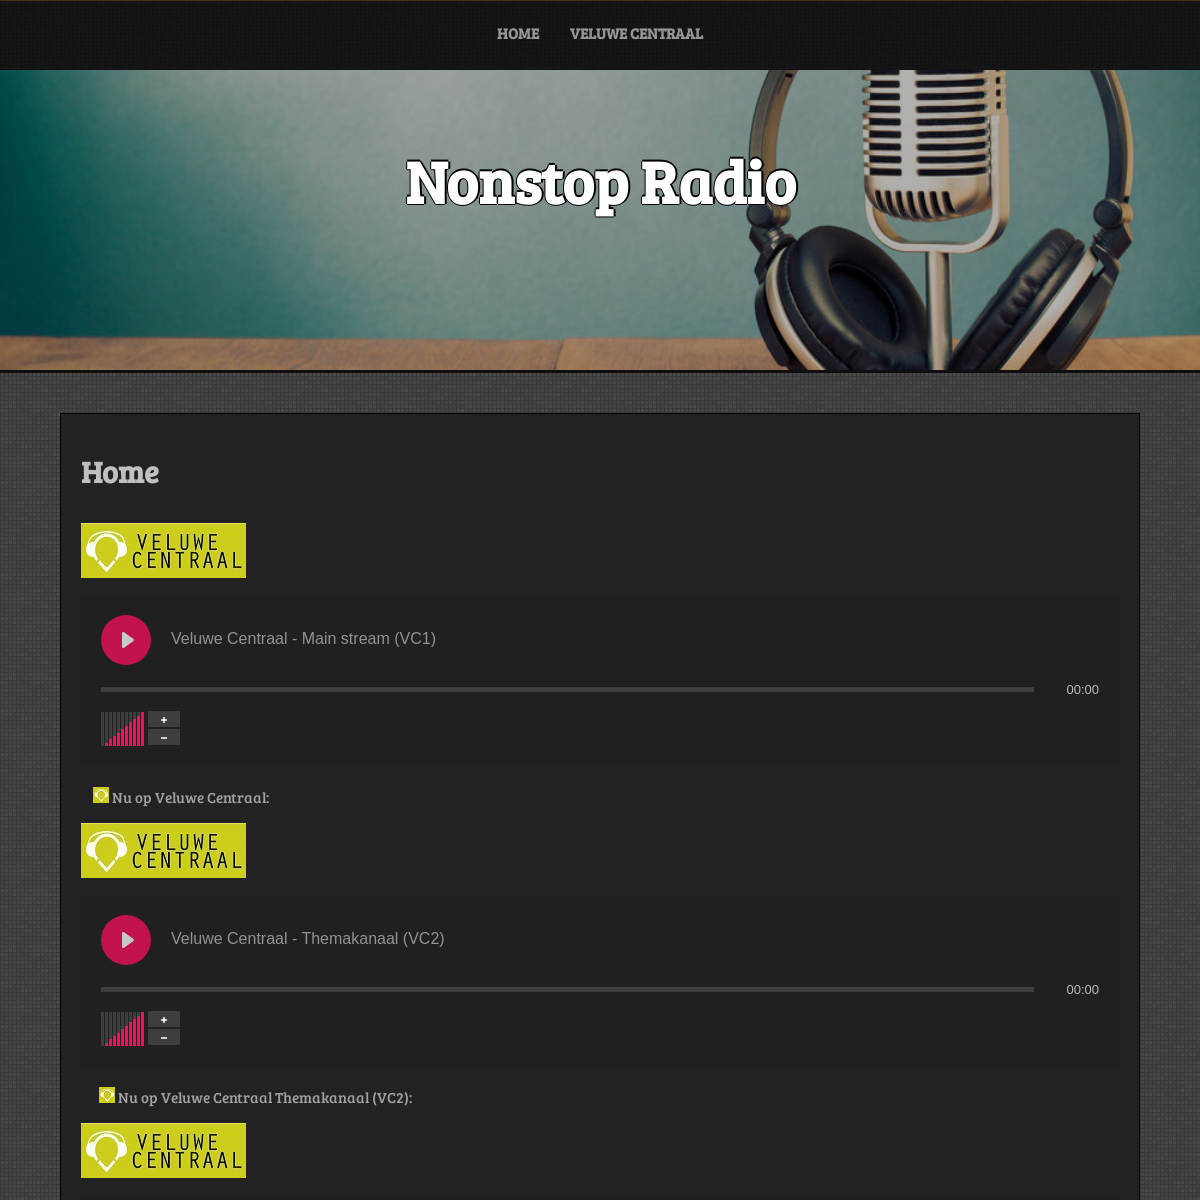 A complete backup of nonstopradio.nl